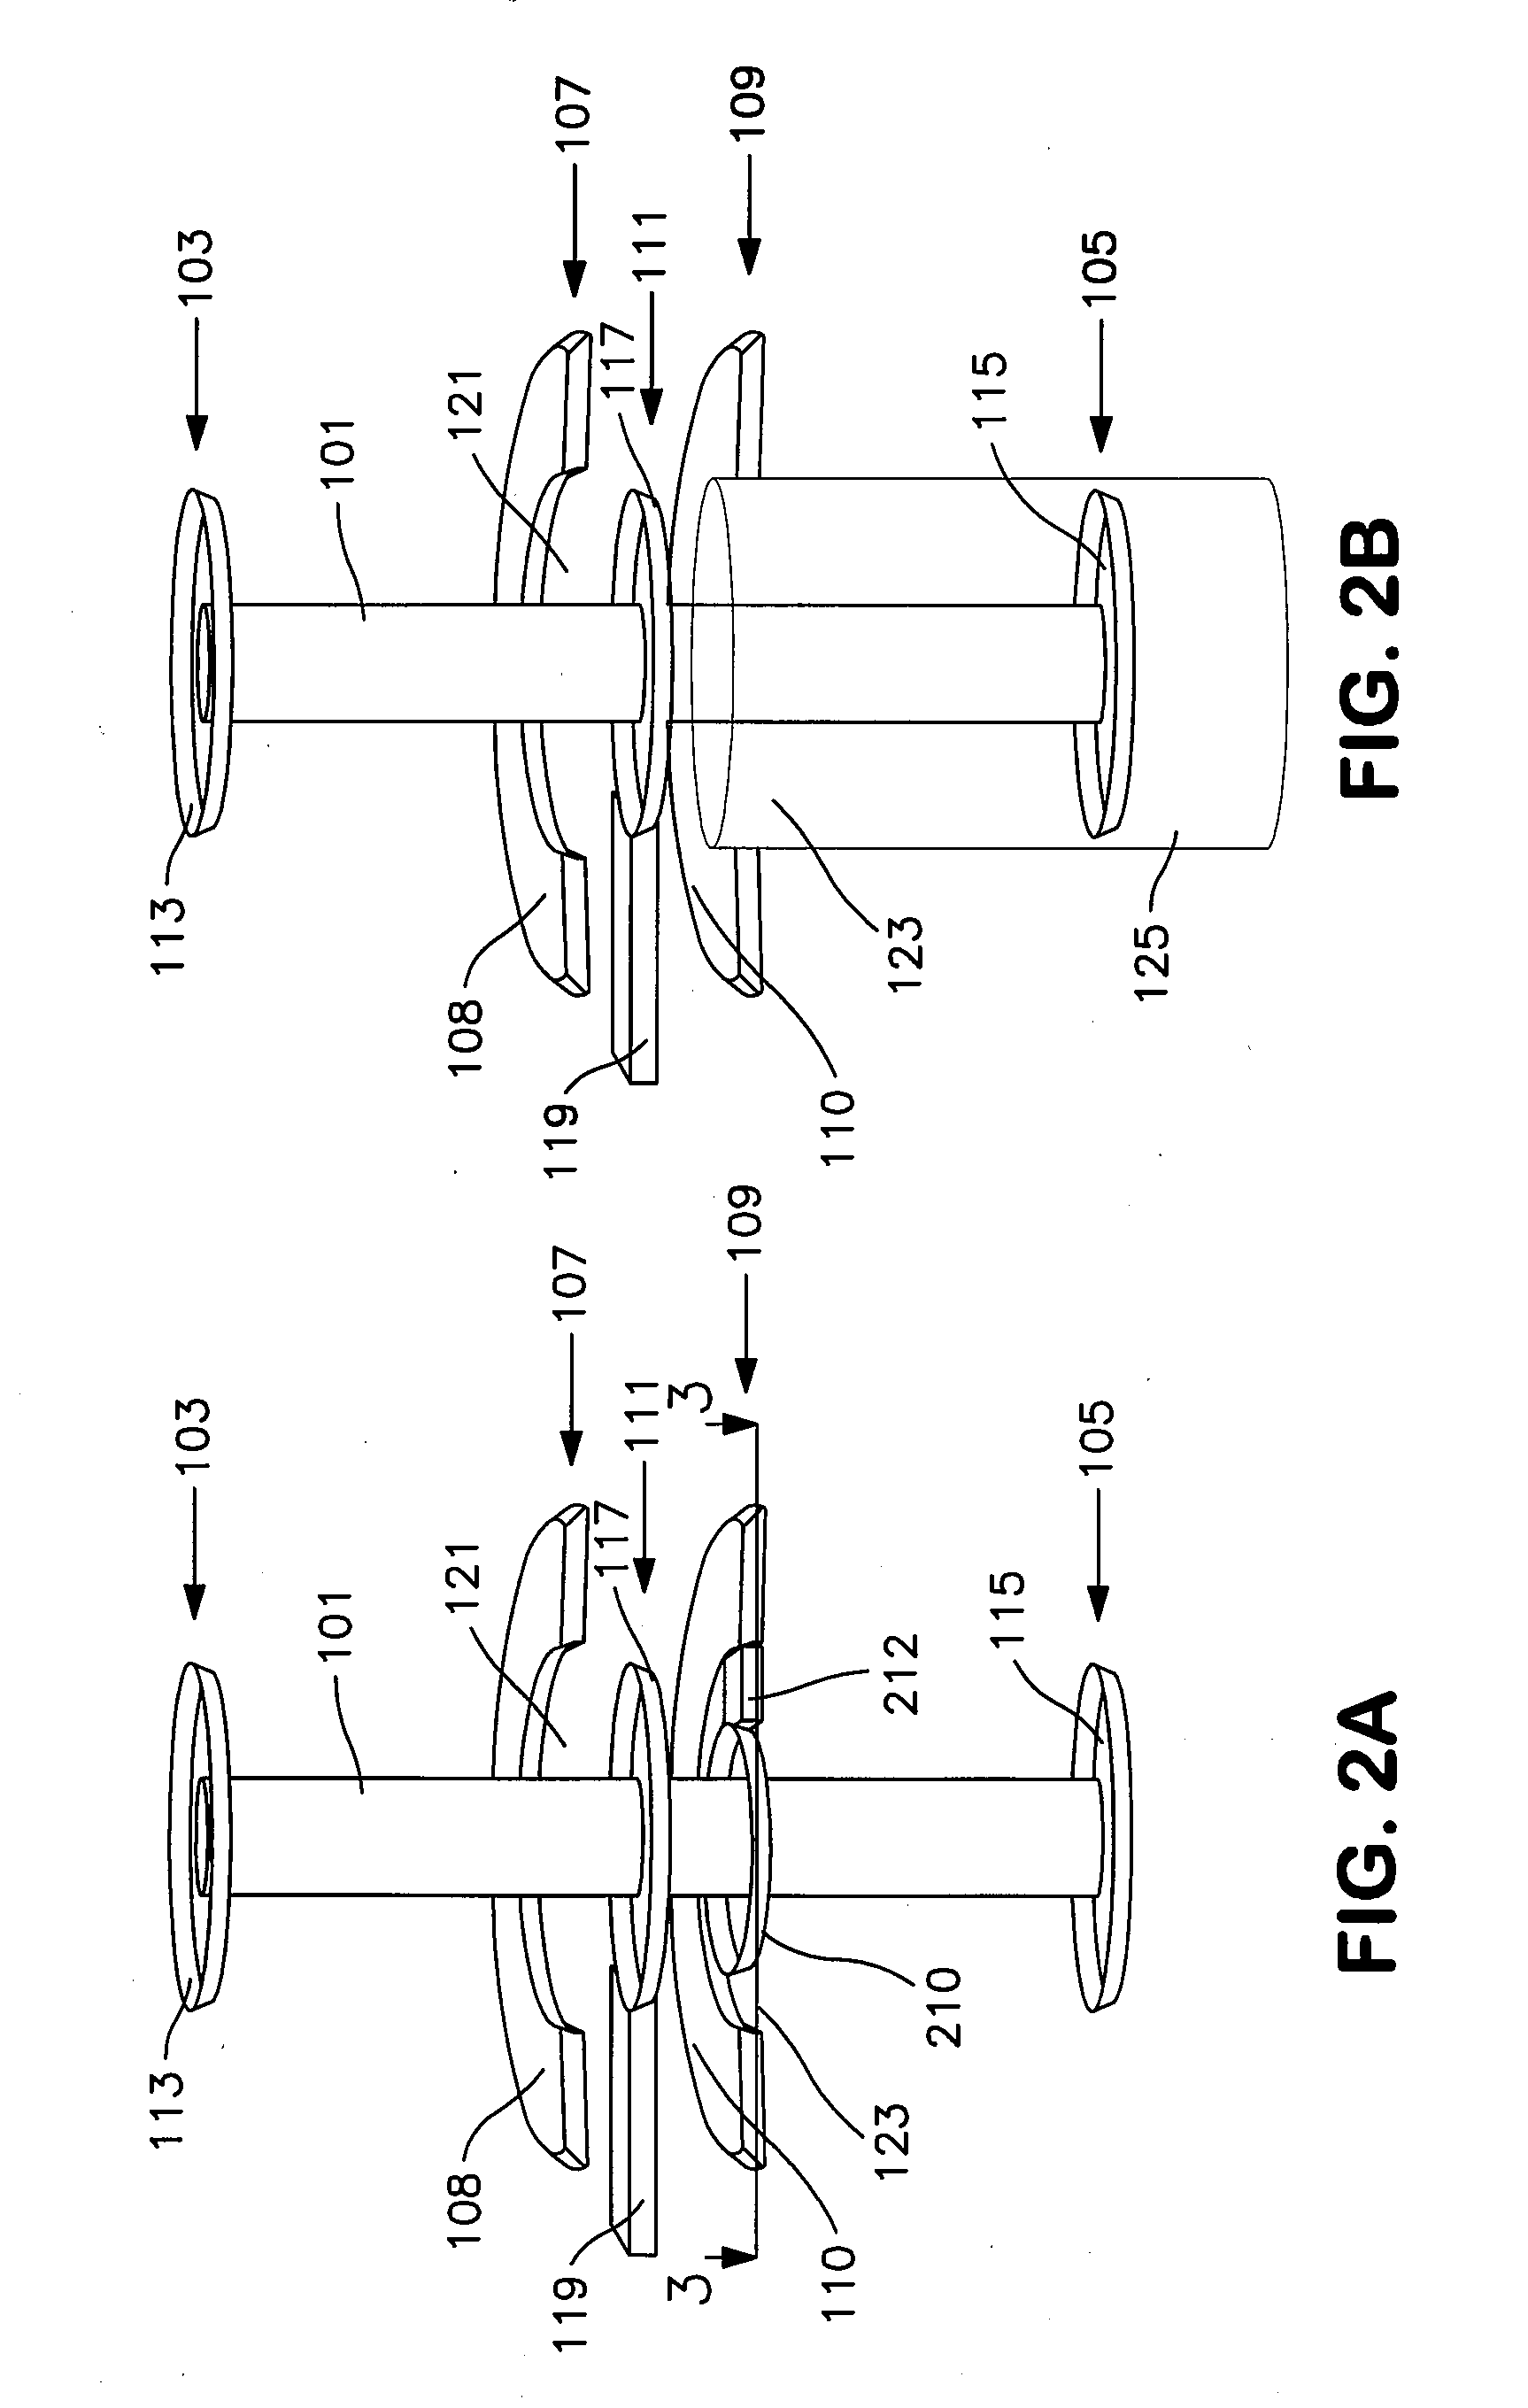 Method for assuring counterbore depth of vias on printed circuit boards and printed circuit boards made accordingly